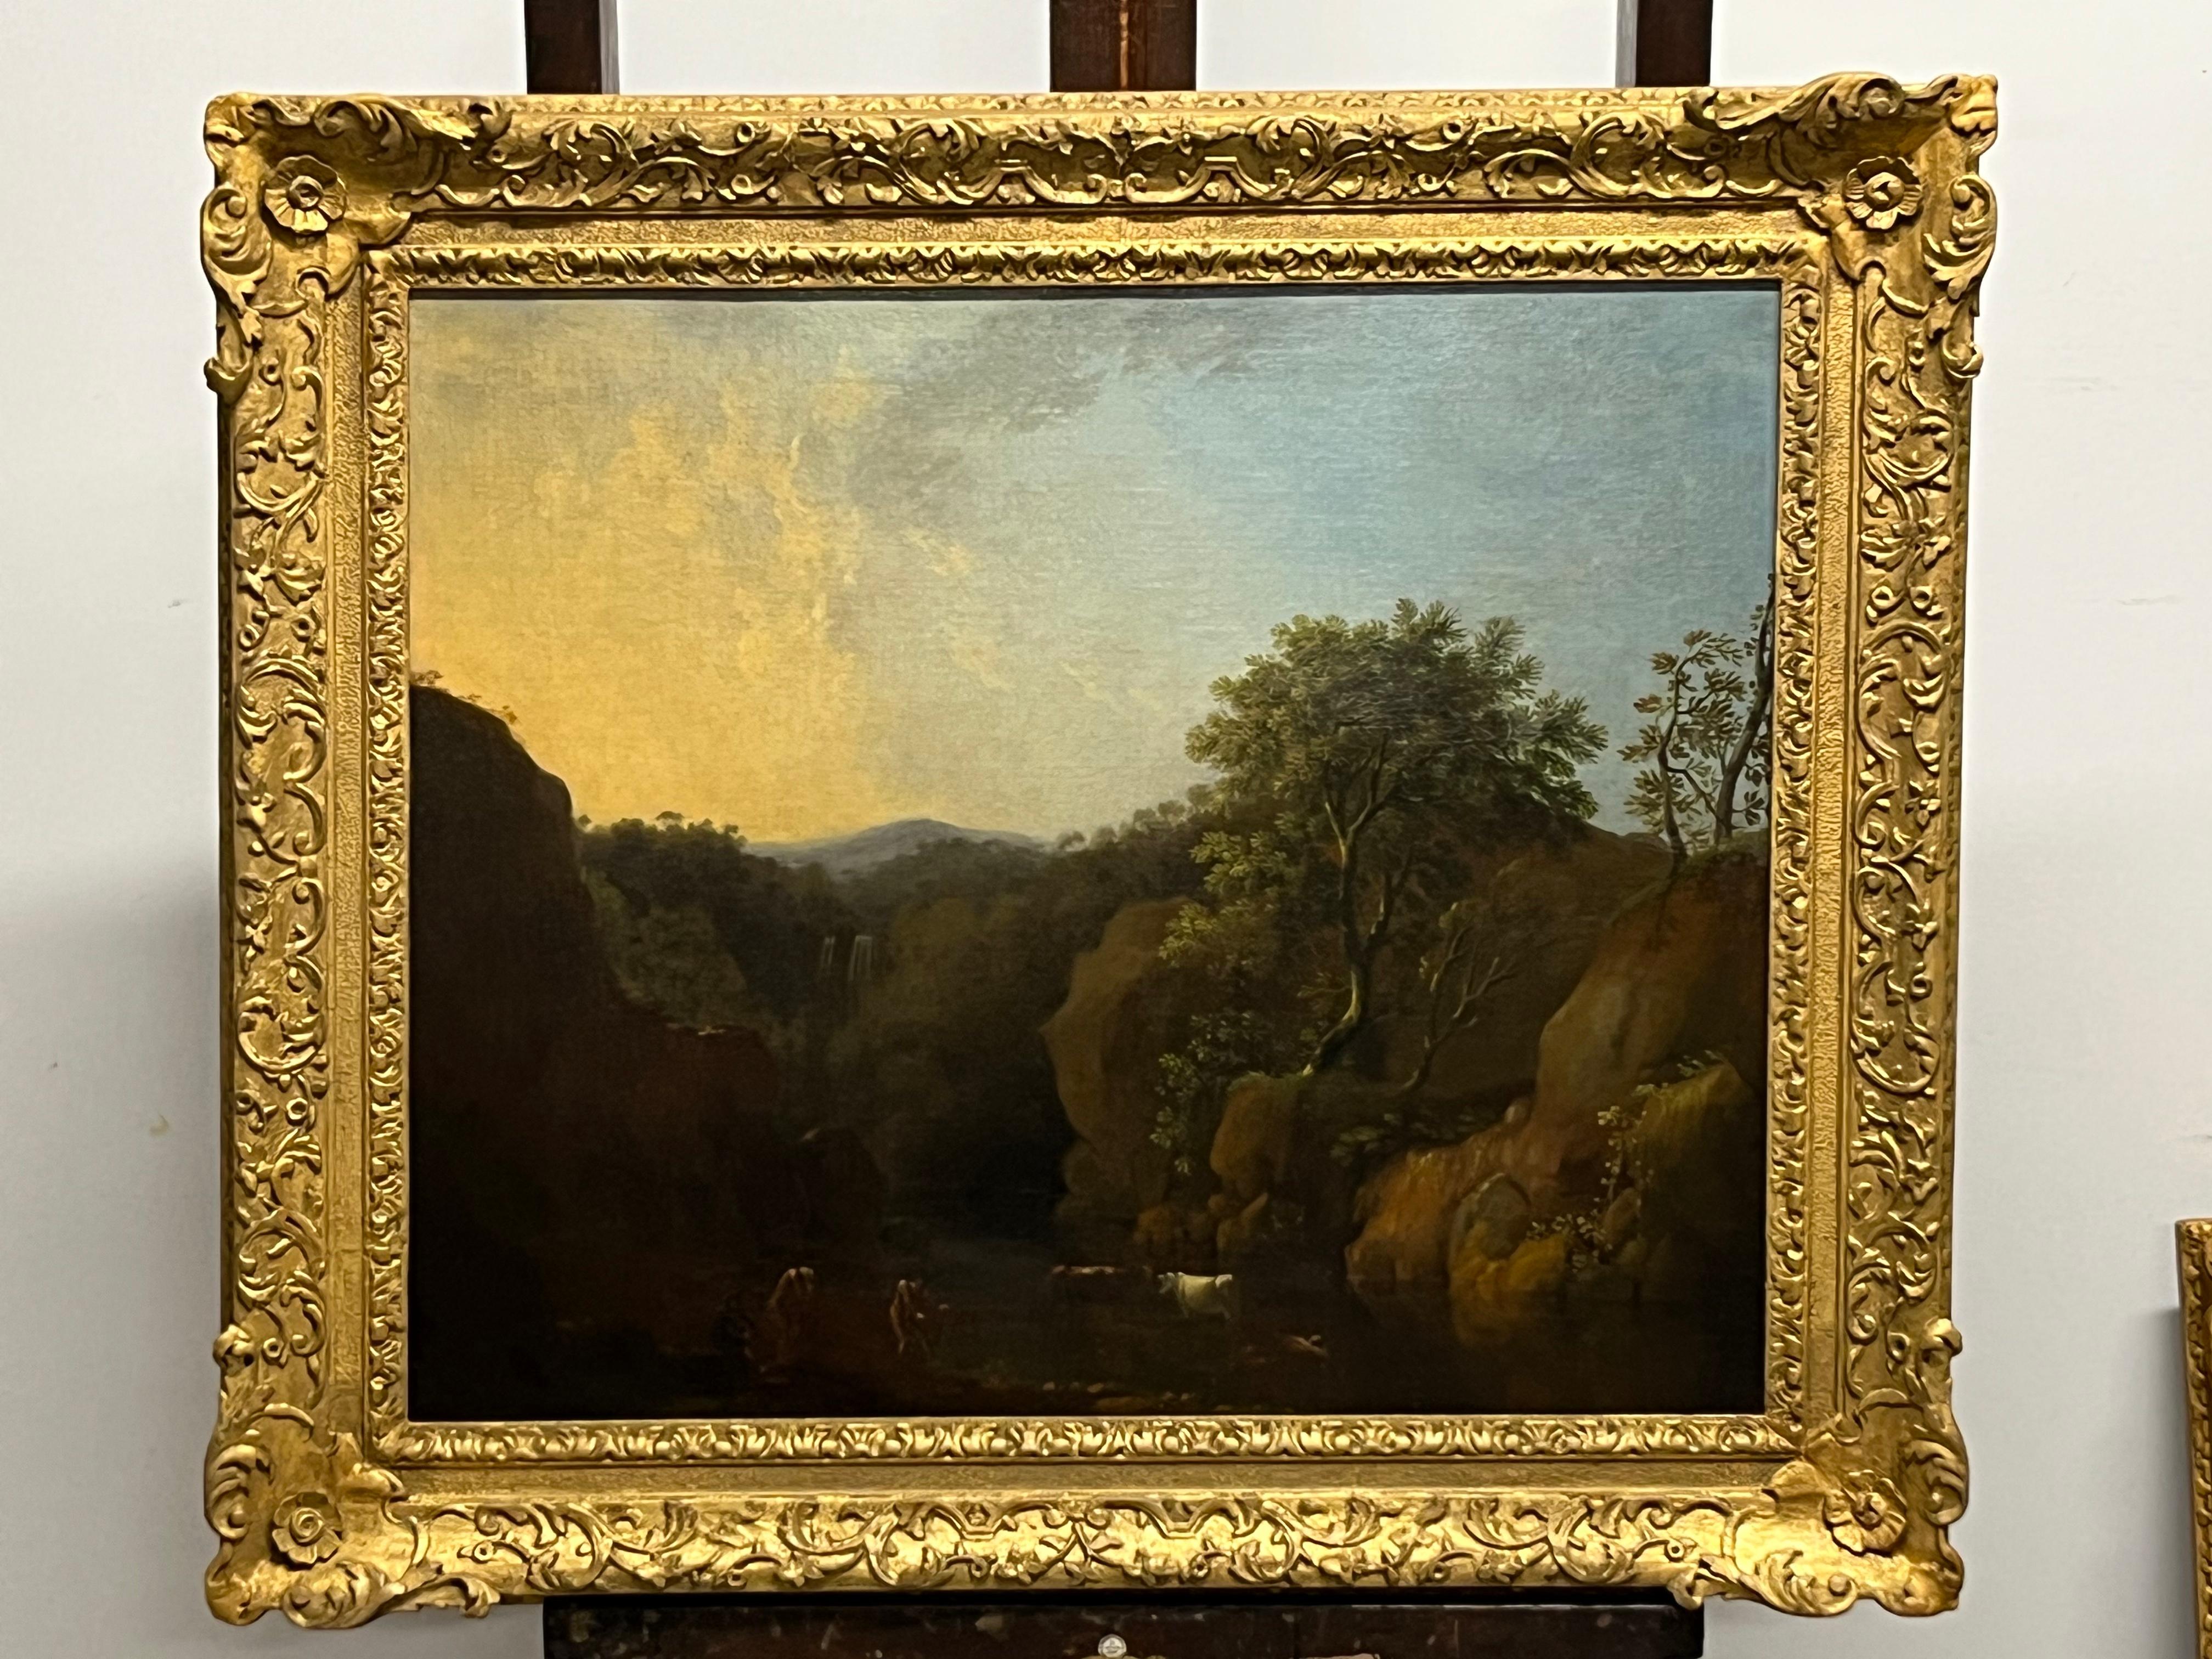 A pair of classical landscapes - Old Masters Painting by Adriaen van Diest